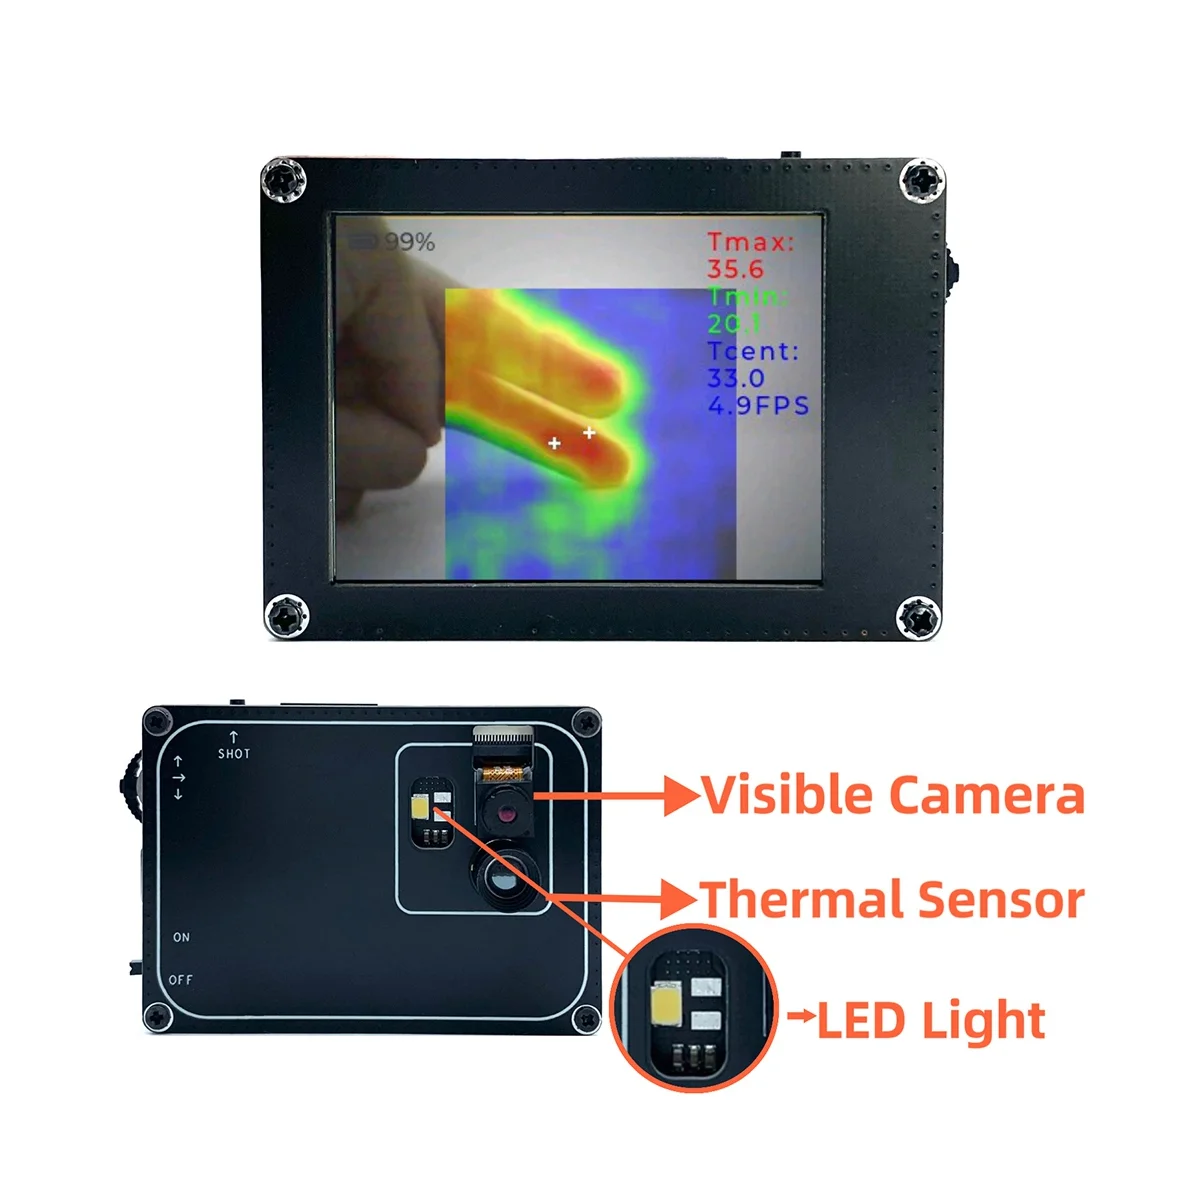 

TICAM1 Industrial Infrared Thermal Imaging Camera with 200MP Visible Light Lens Temperature Detect Thermal Imager